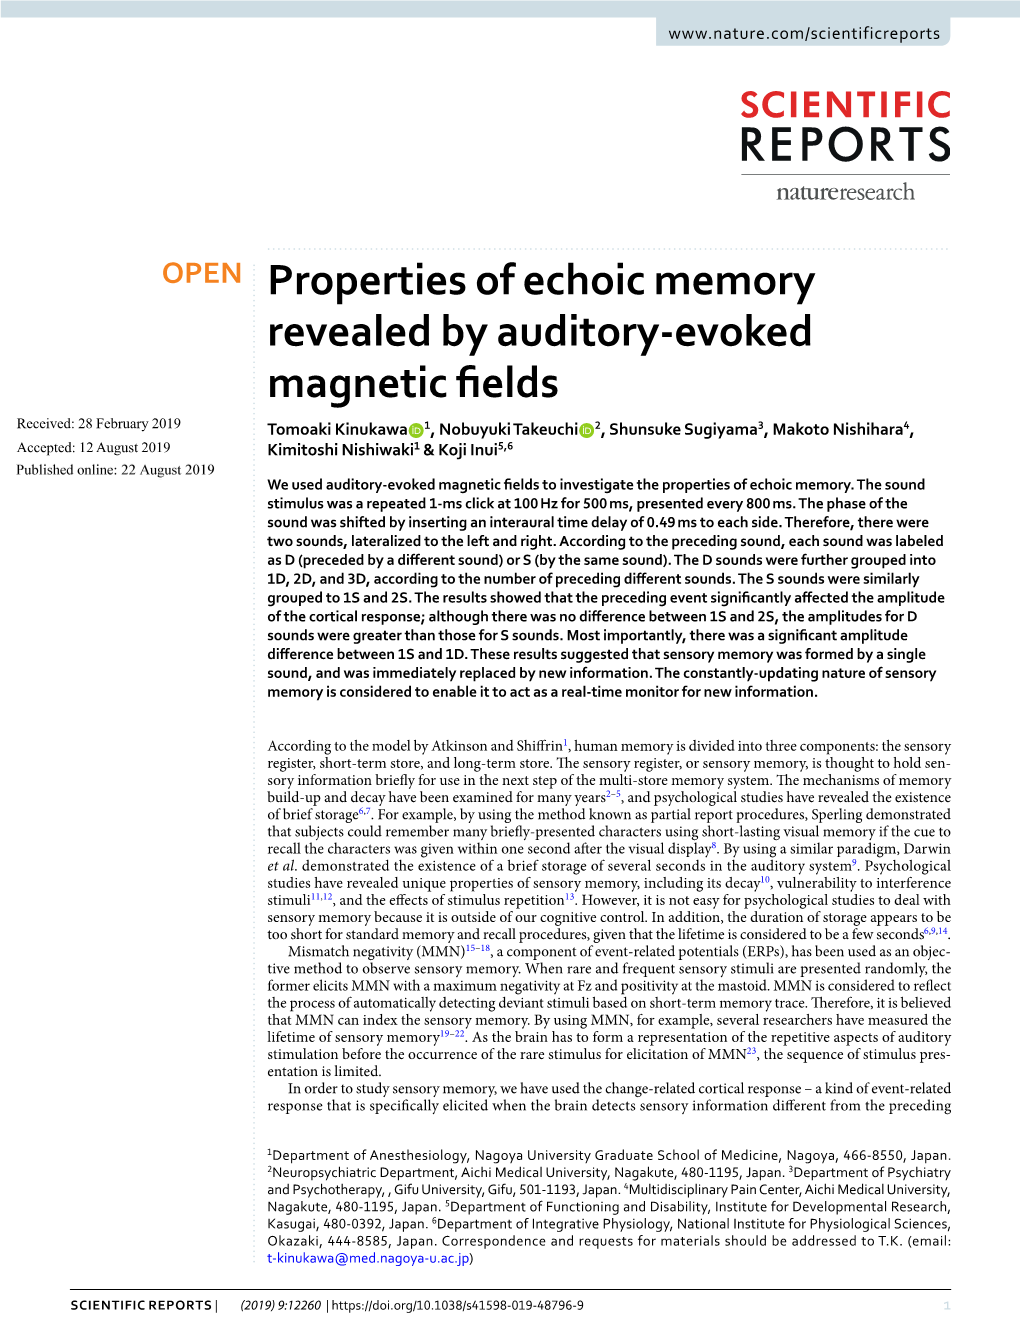 Properties of Echoic Memory Revealed by Auditory-Evoked Magnetic Fields